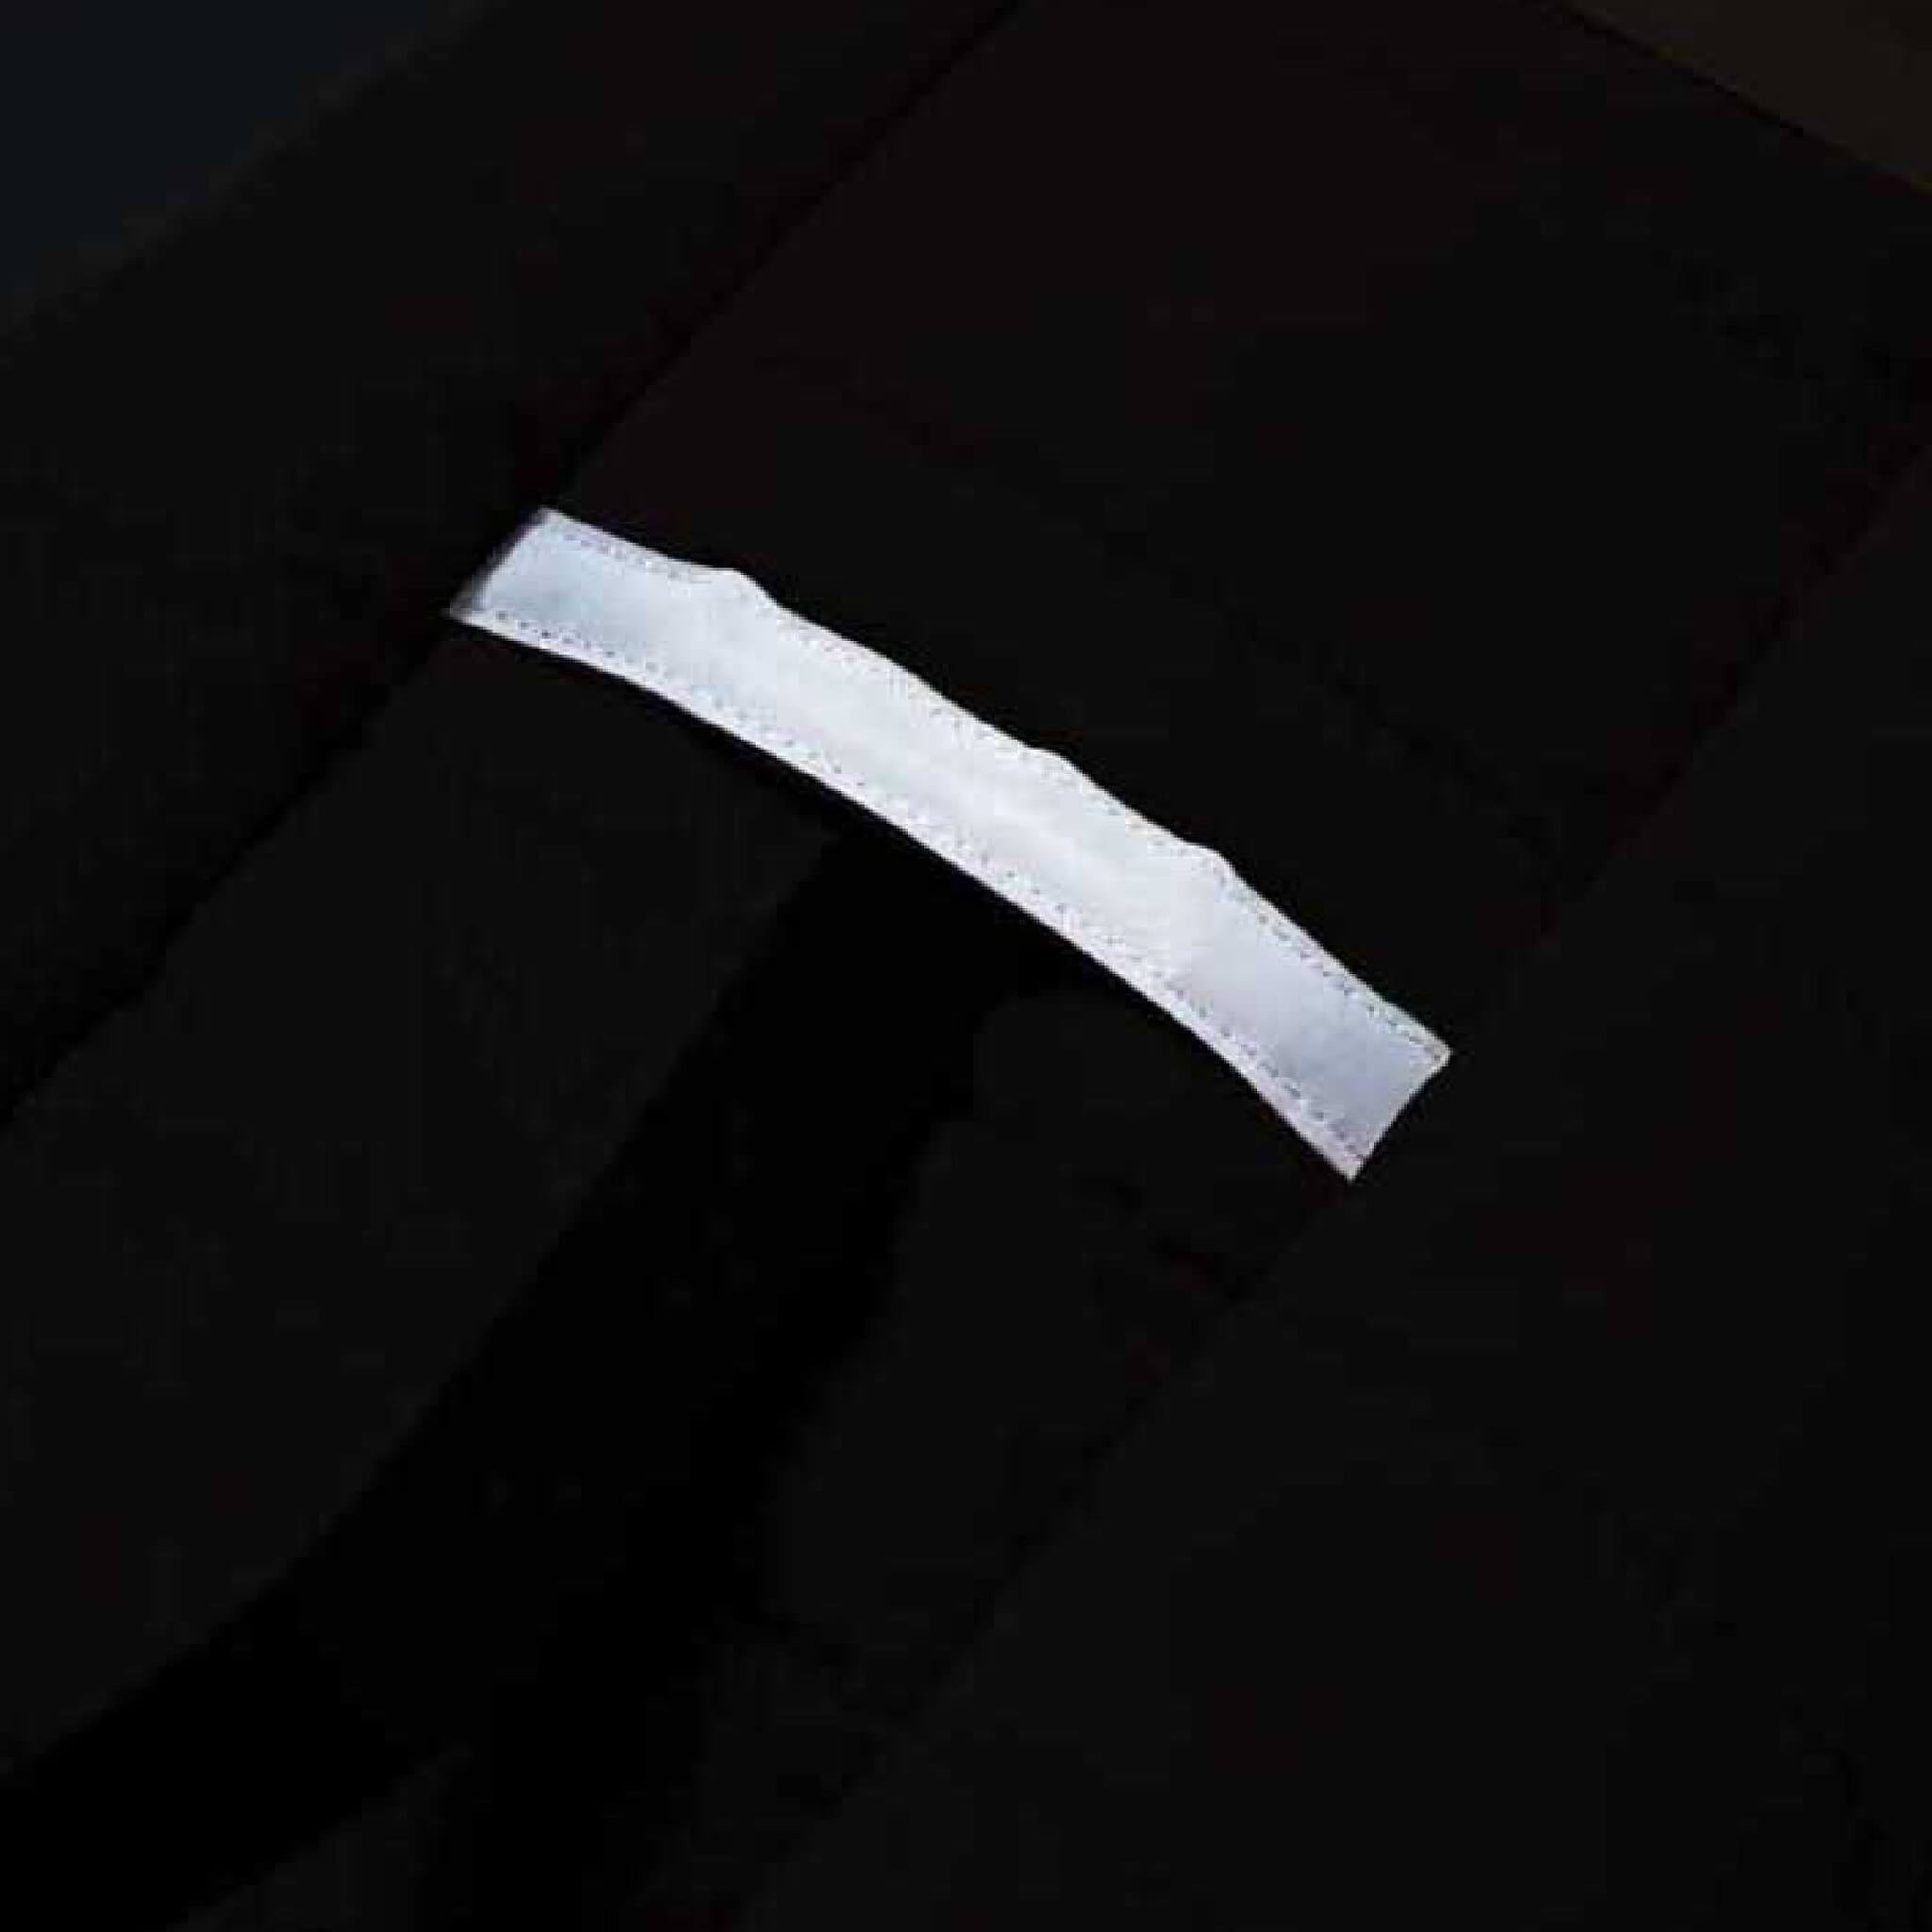 Reflective stripe for visibility in low light conditions.